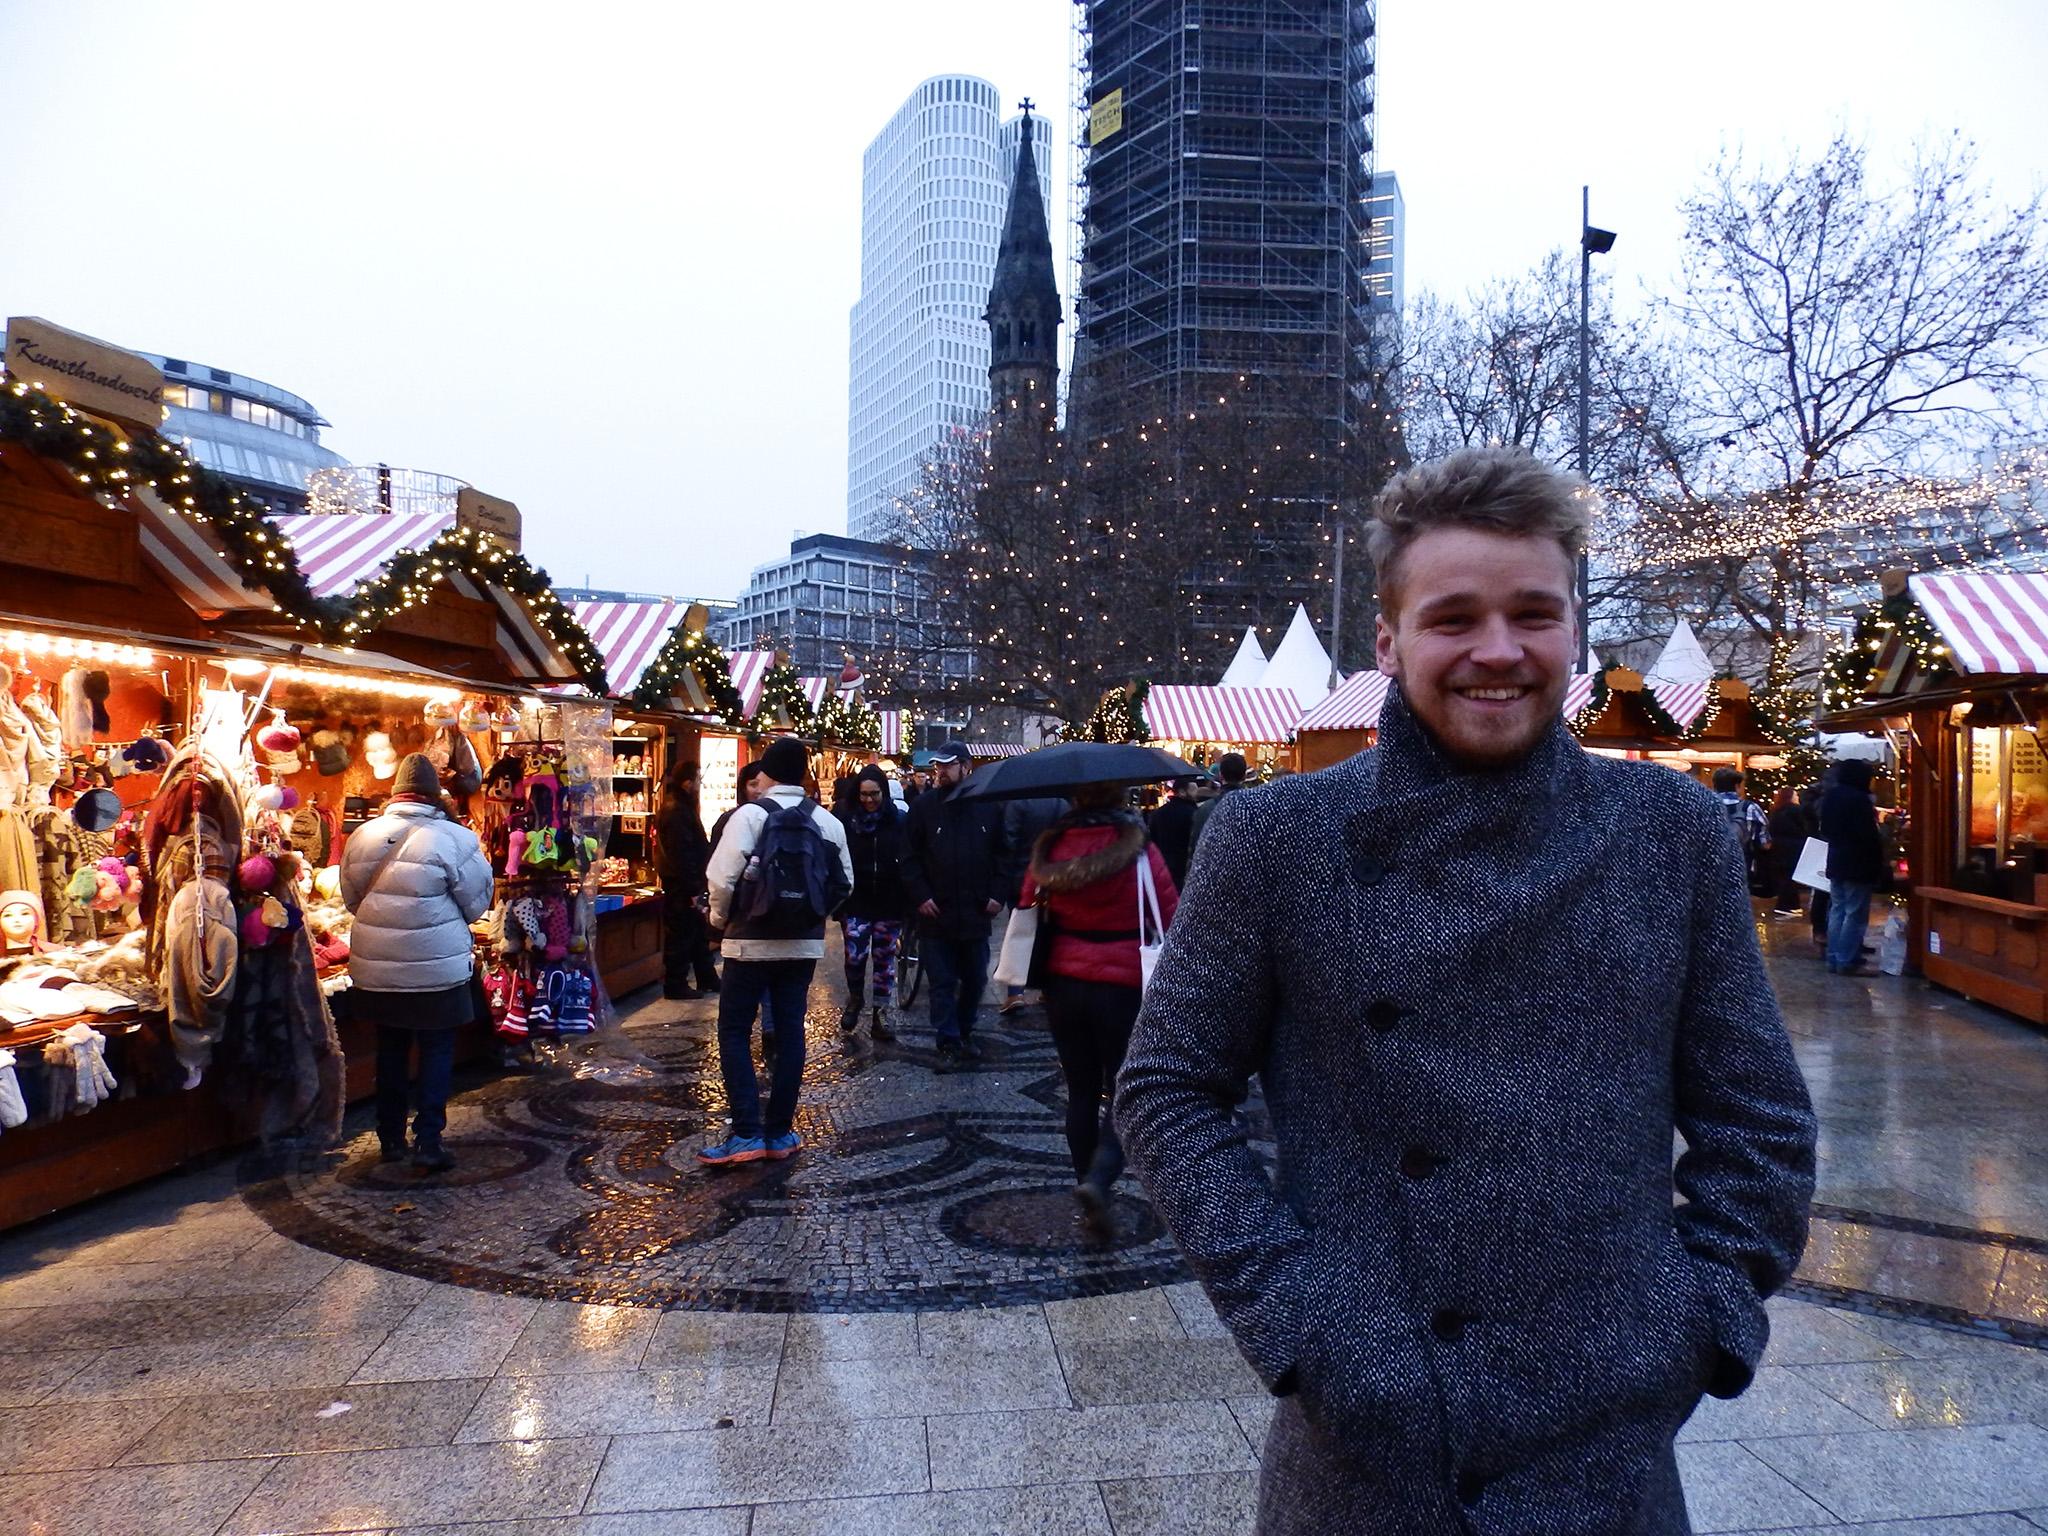 Richard Pawson, 24, at the reopened Christmas market next to the Kaiser Wilhelm Memorial Church in Berlin